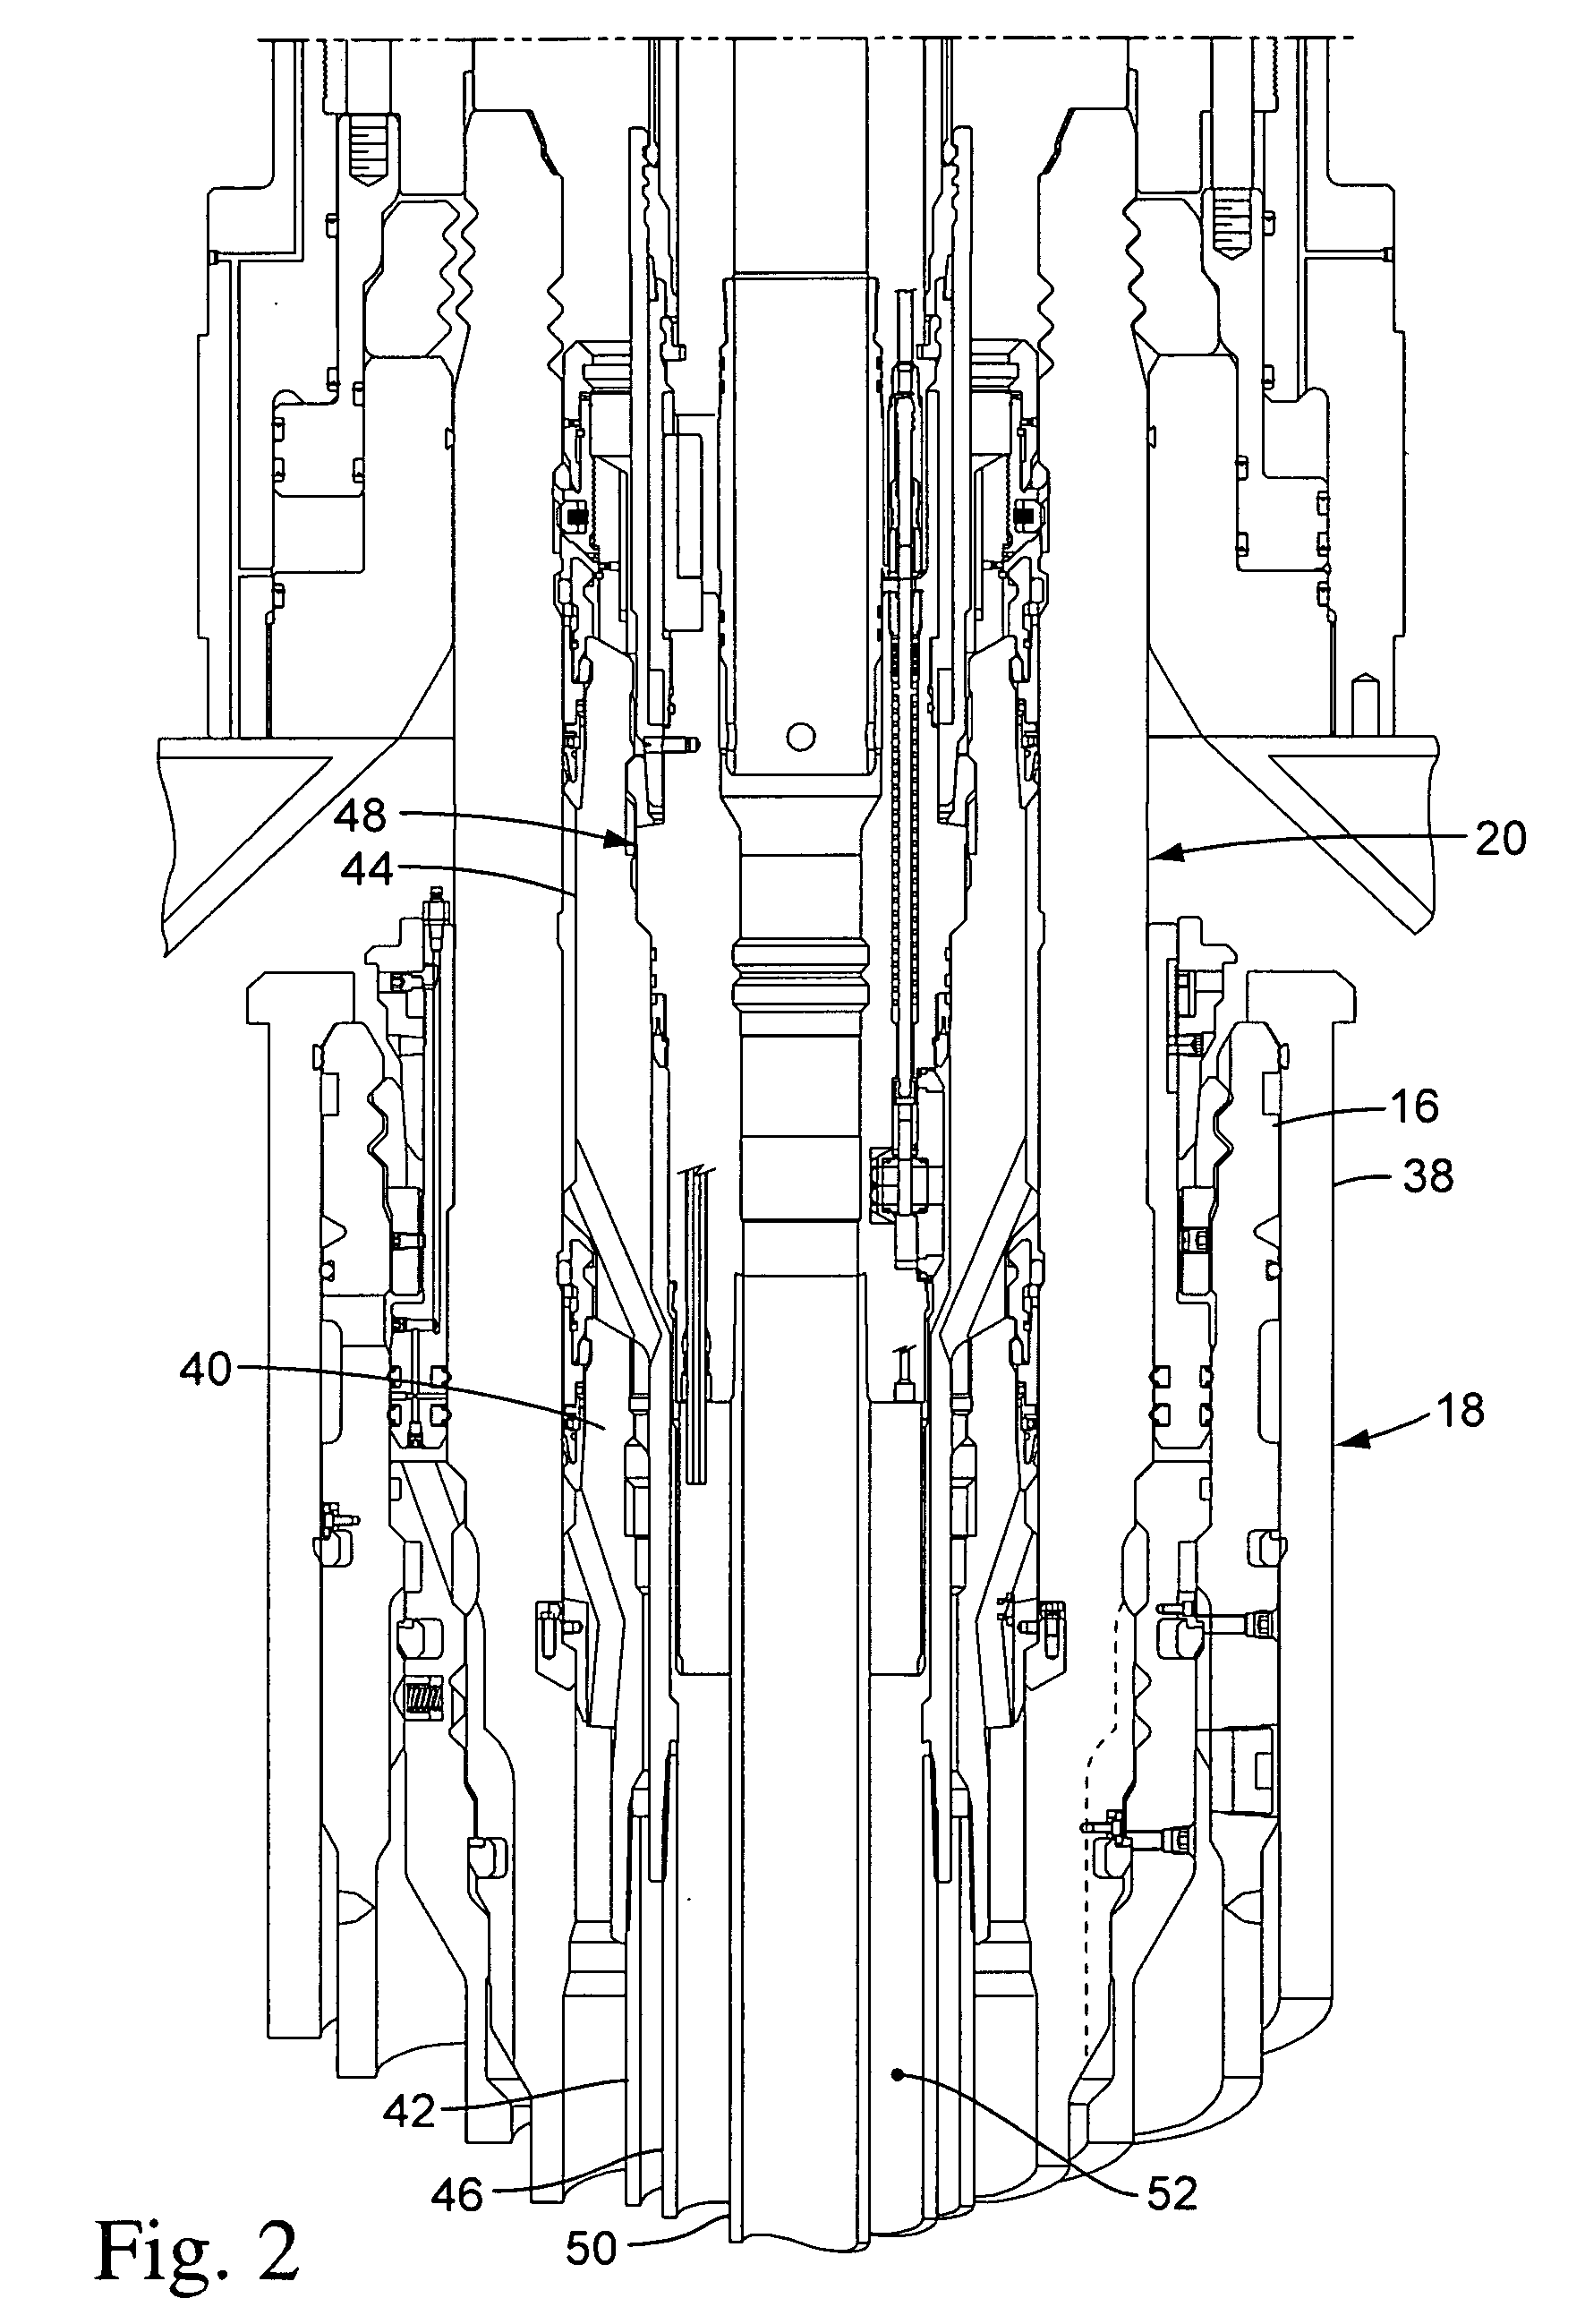 Apparatus and method for installation of subsea well completion systems